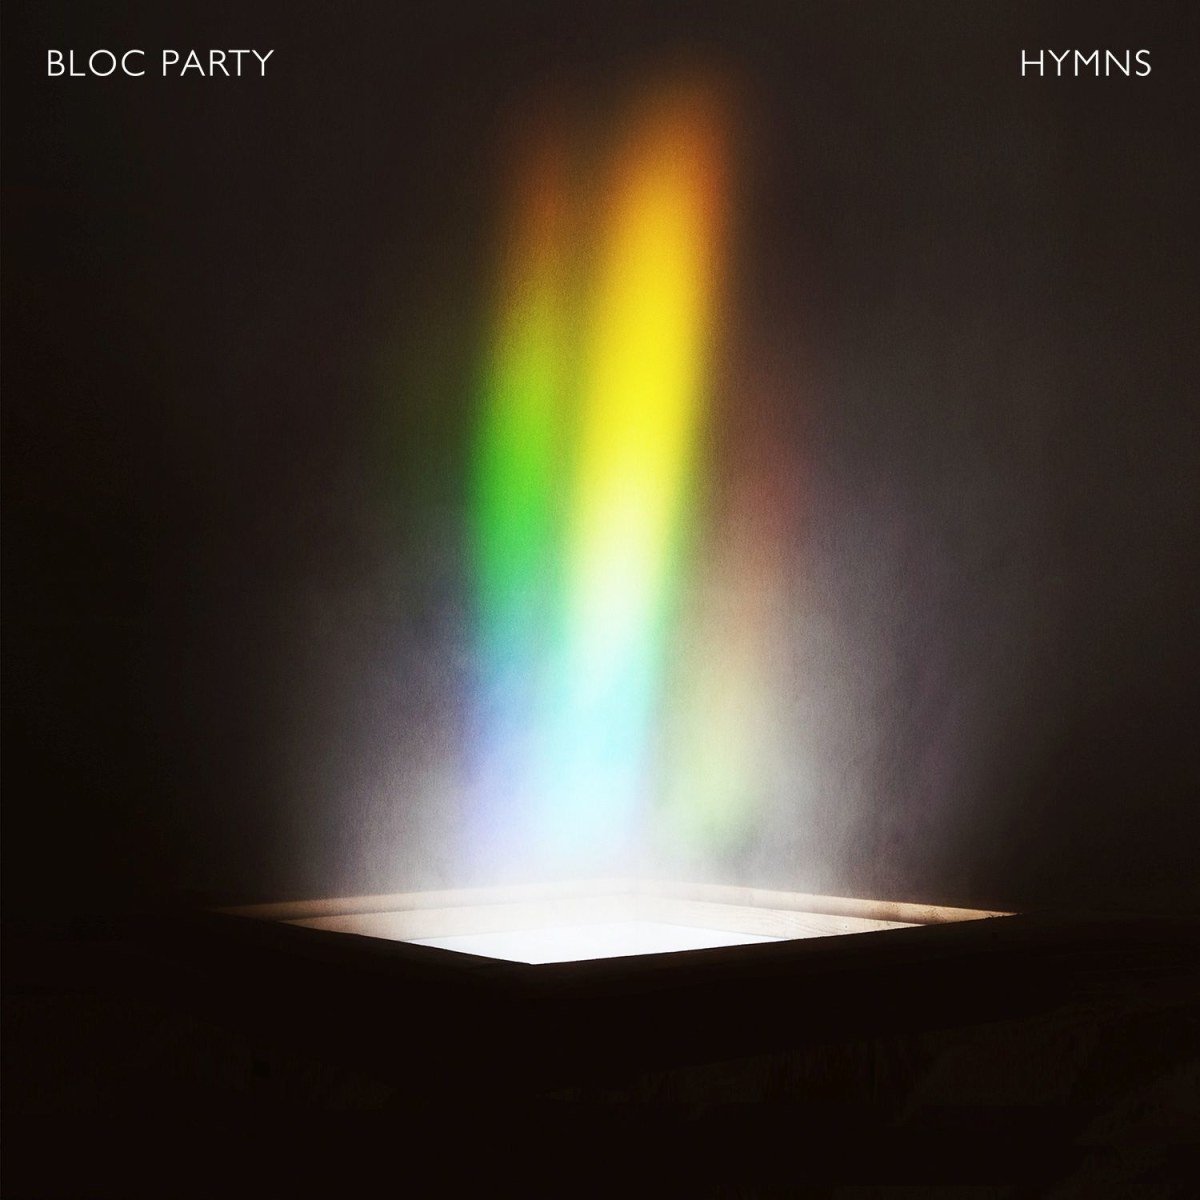 Bloc Party – Hymns {Deluxe Edition} (2016) [HDTracks FLAC 24bit/44,1kHz]